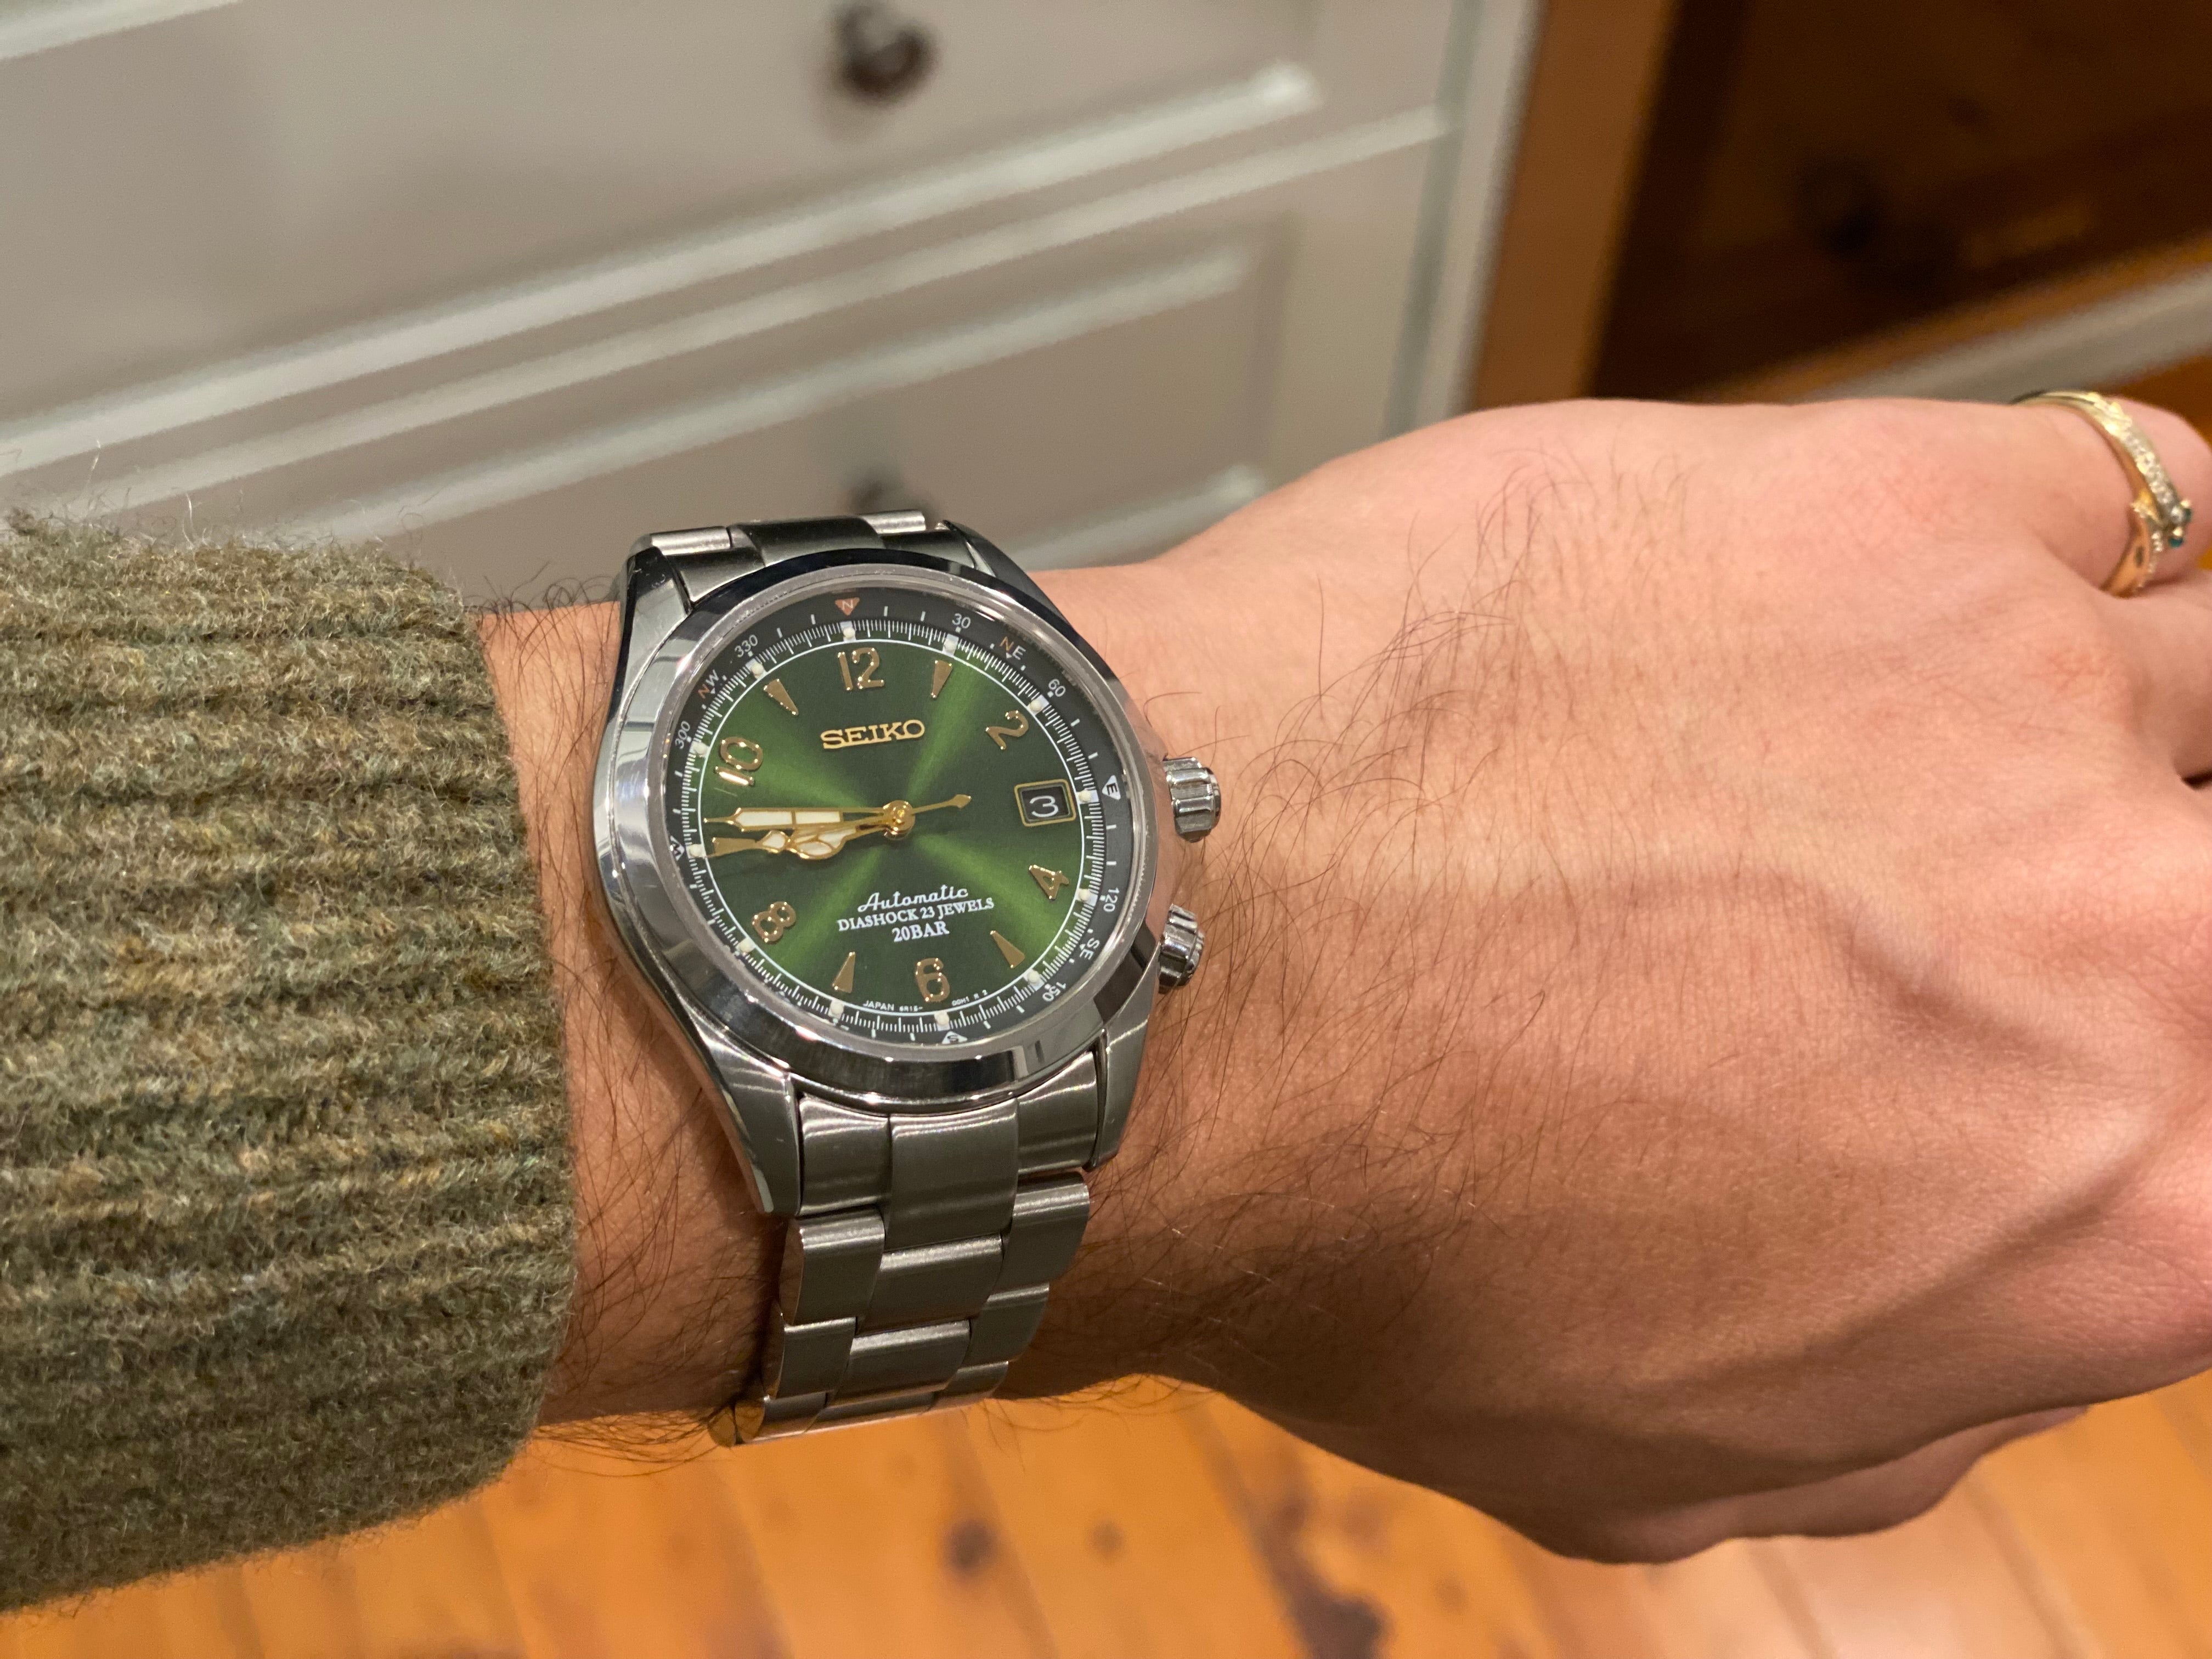 [Seiko Alpinist] King Oyster Bracelet with Micro-Adjustable Clasp